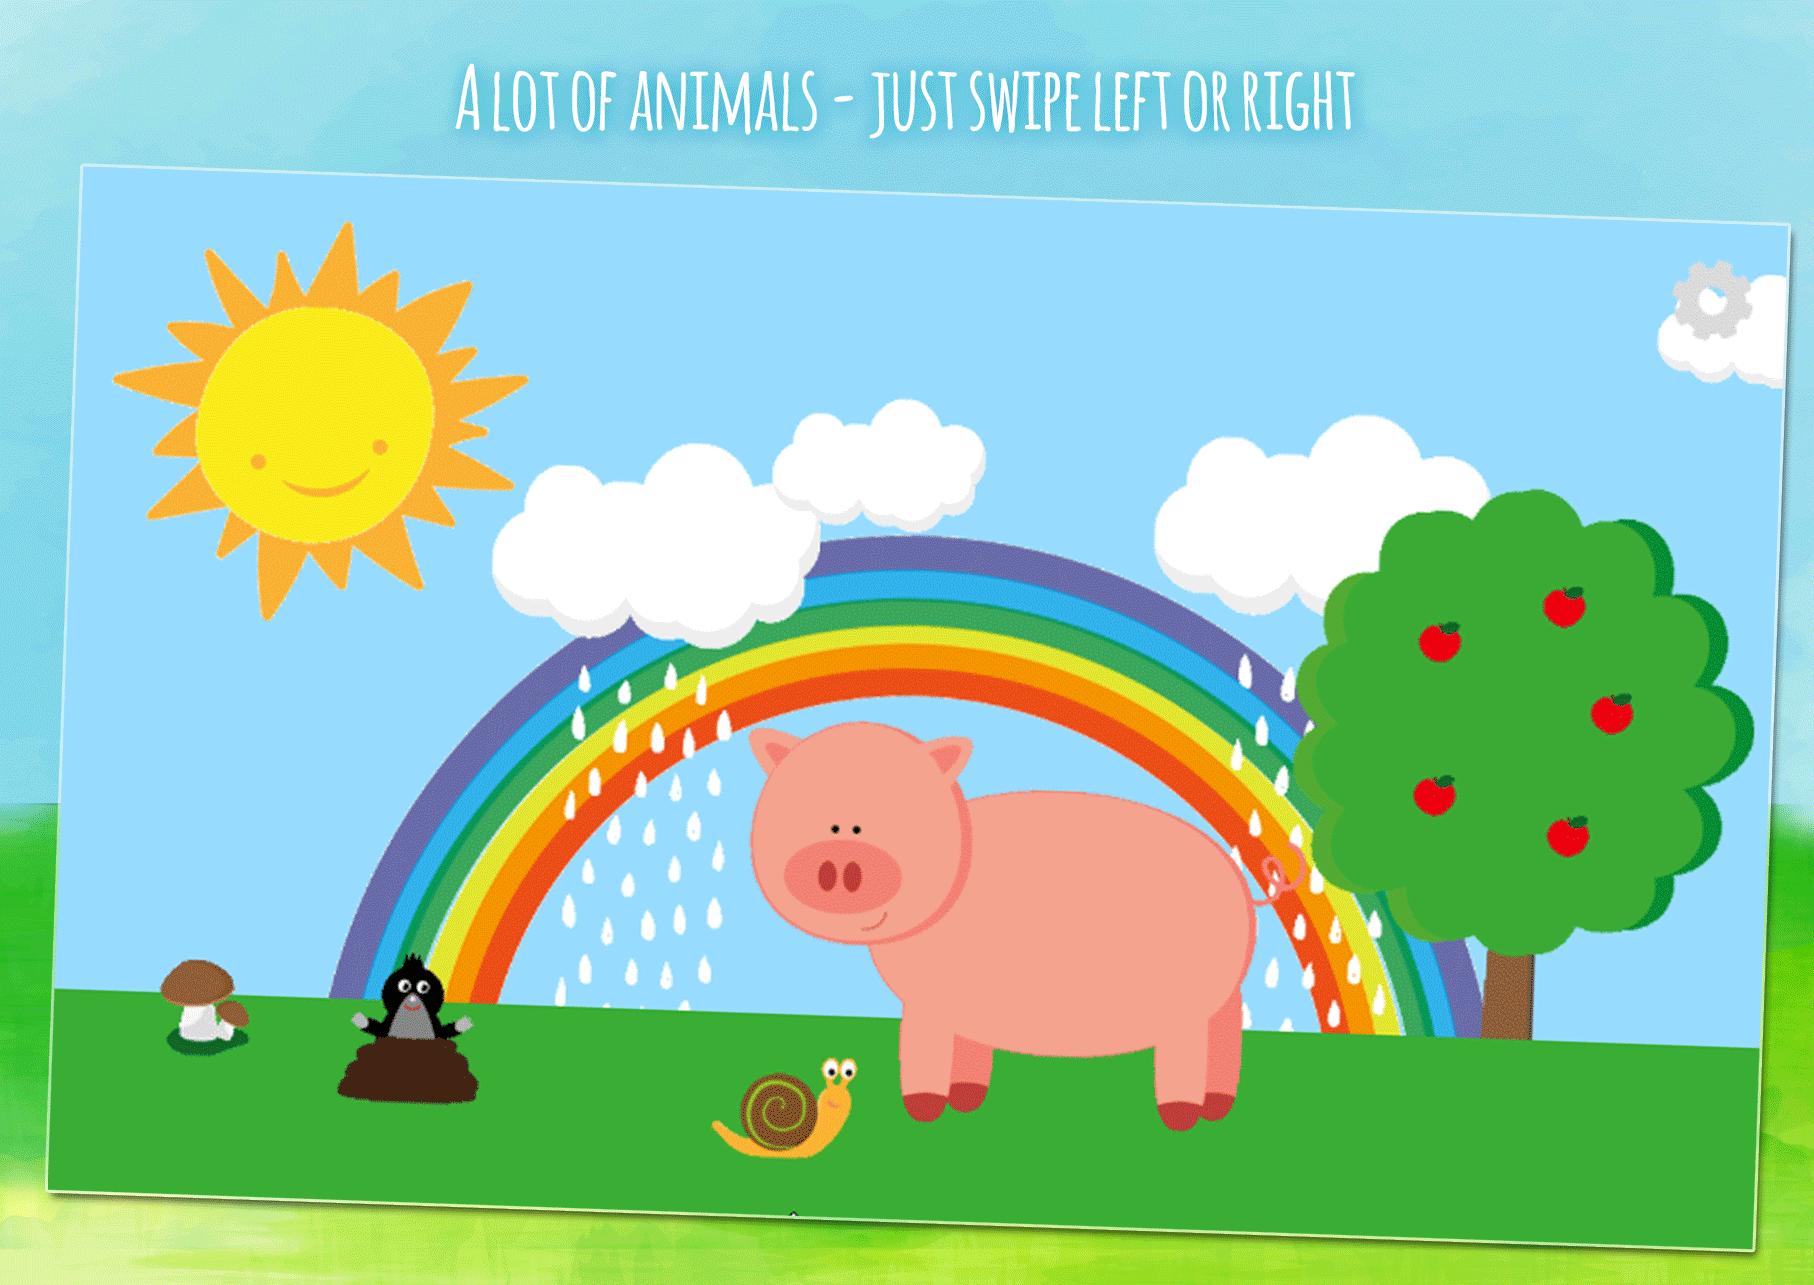 Moo & animals - kids game for toddlers from 1 year 1.7.7 Screenshot 8